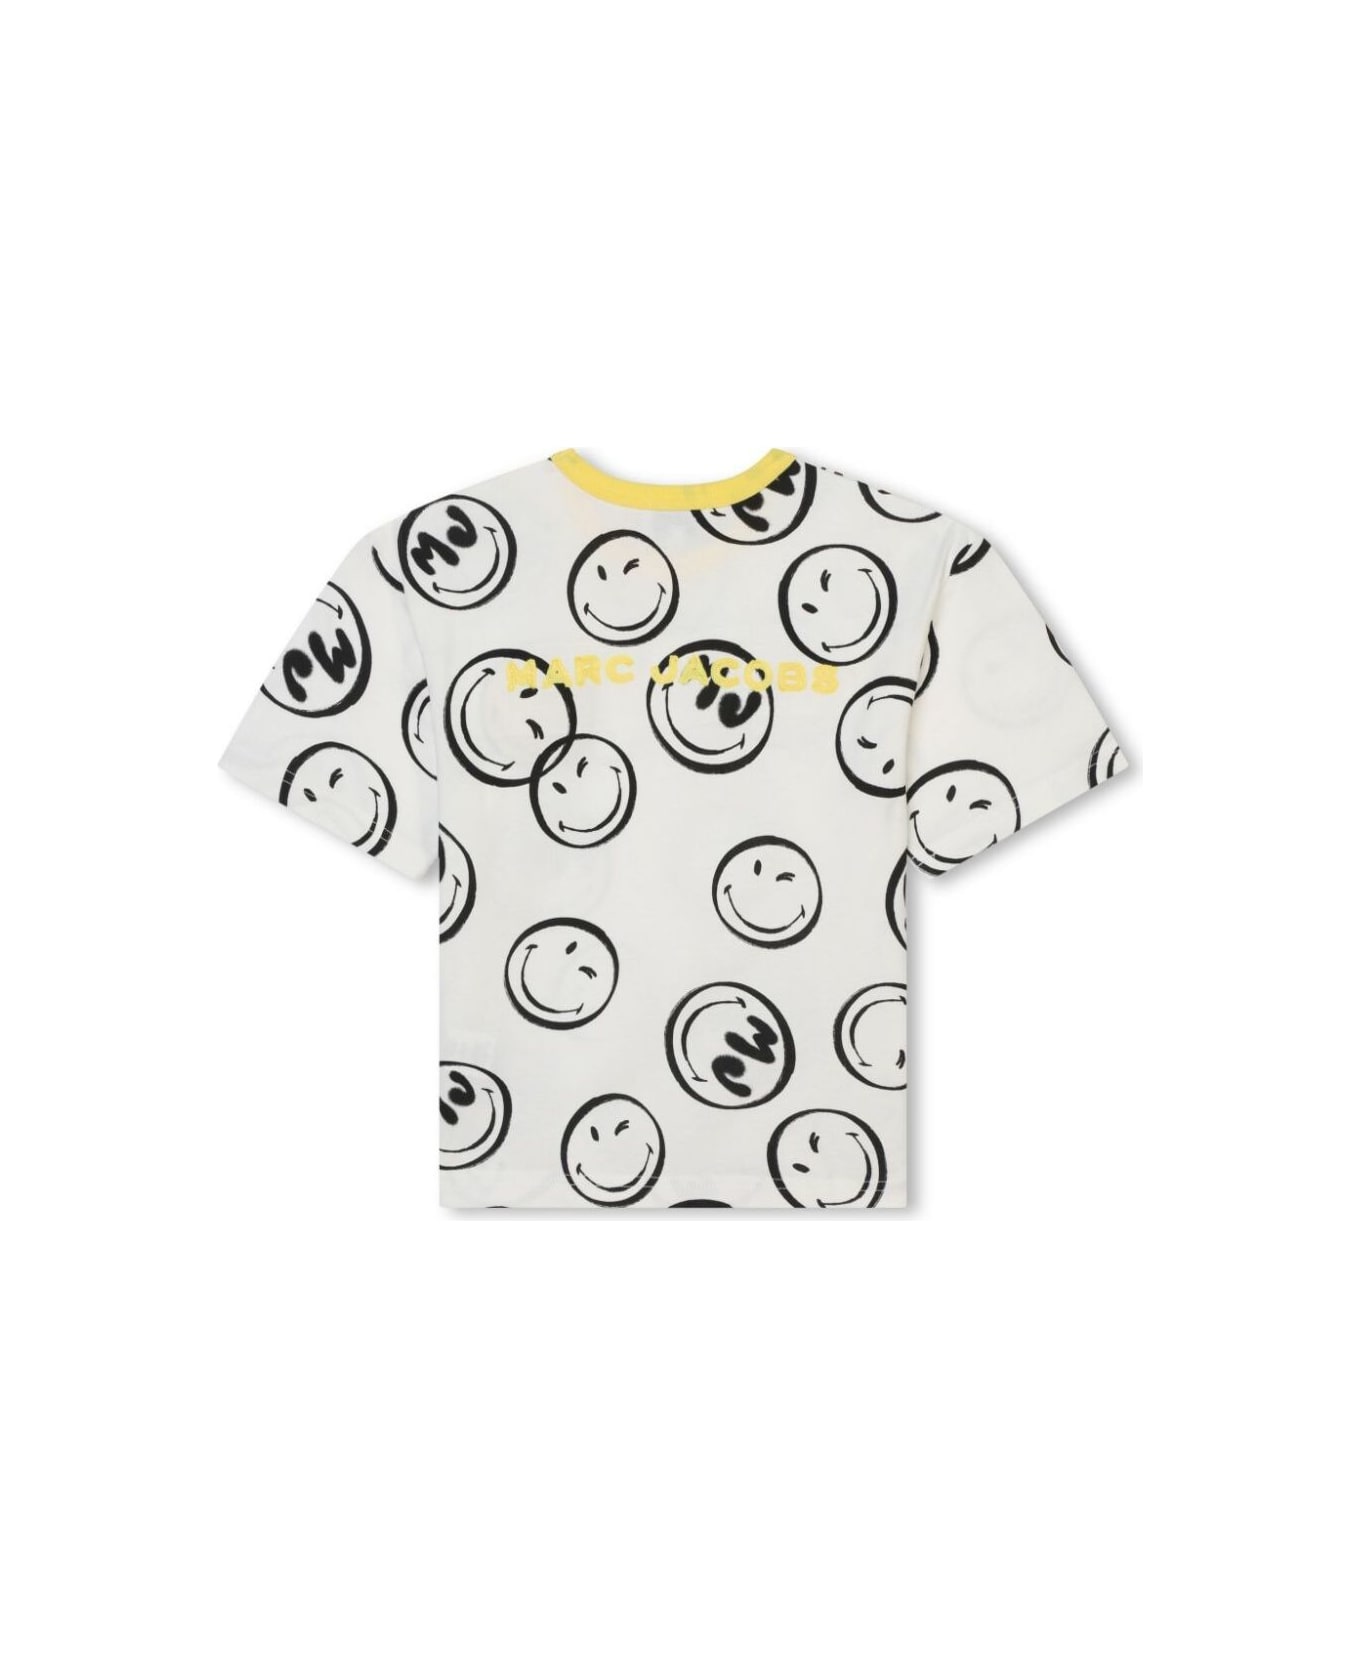 Marc Jacobs White Crewneck T-shirt With All-over Smile Print In Cotton Boy - White